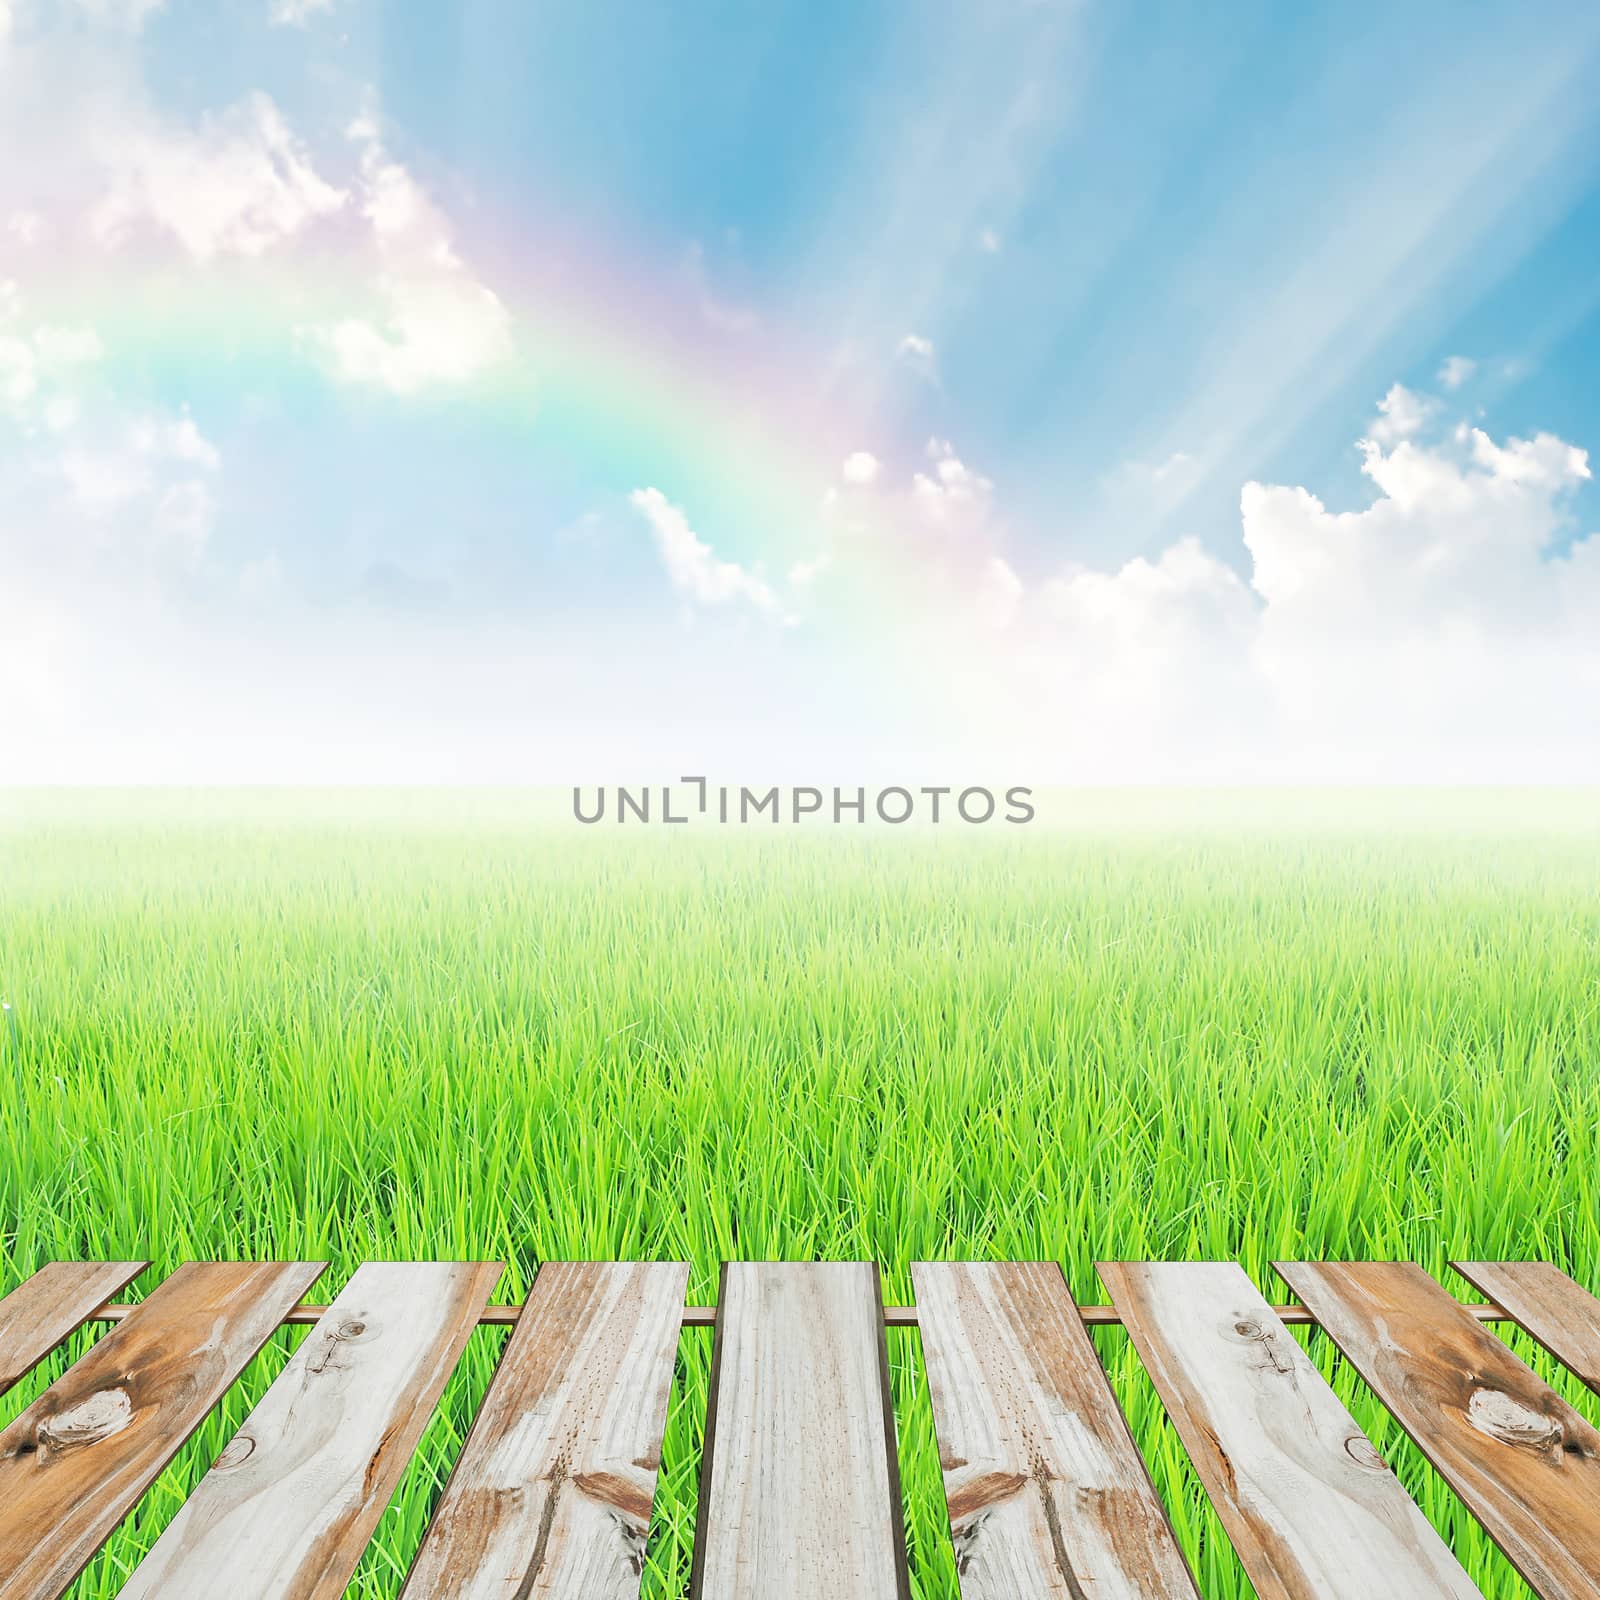 old wooden and field on a background of the blue sky with rainbow